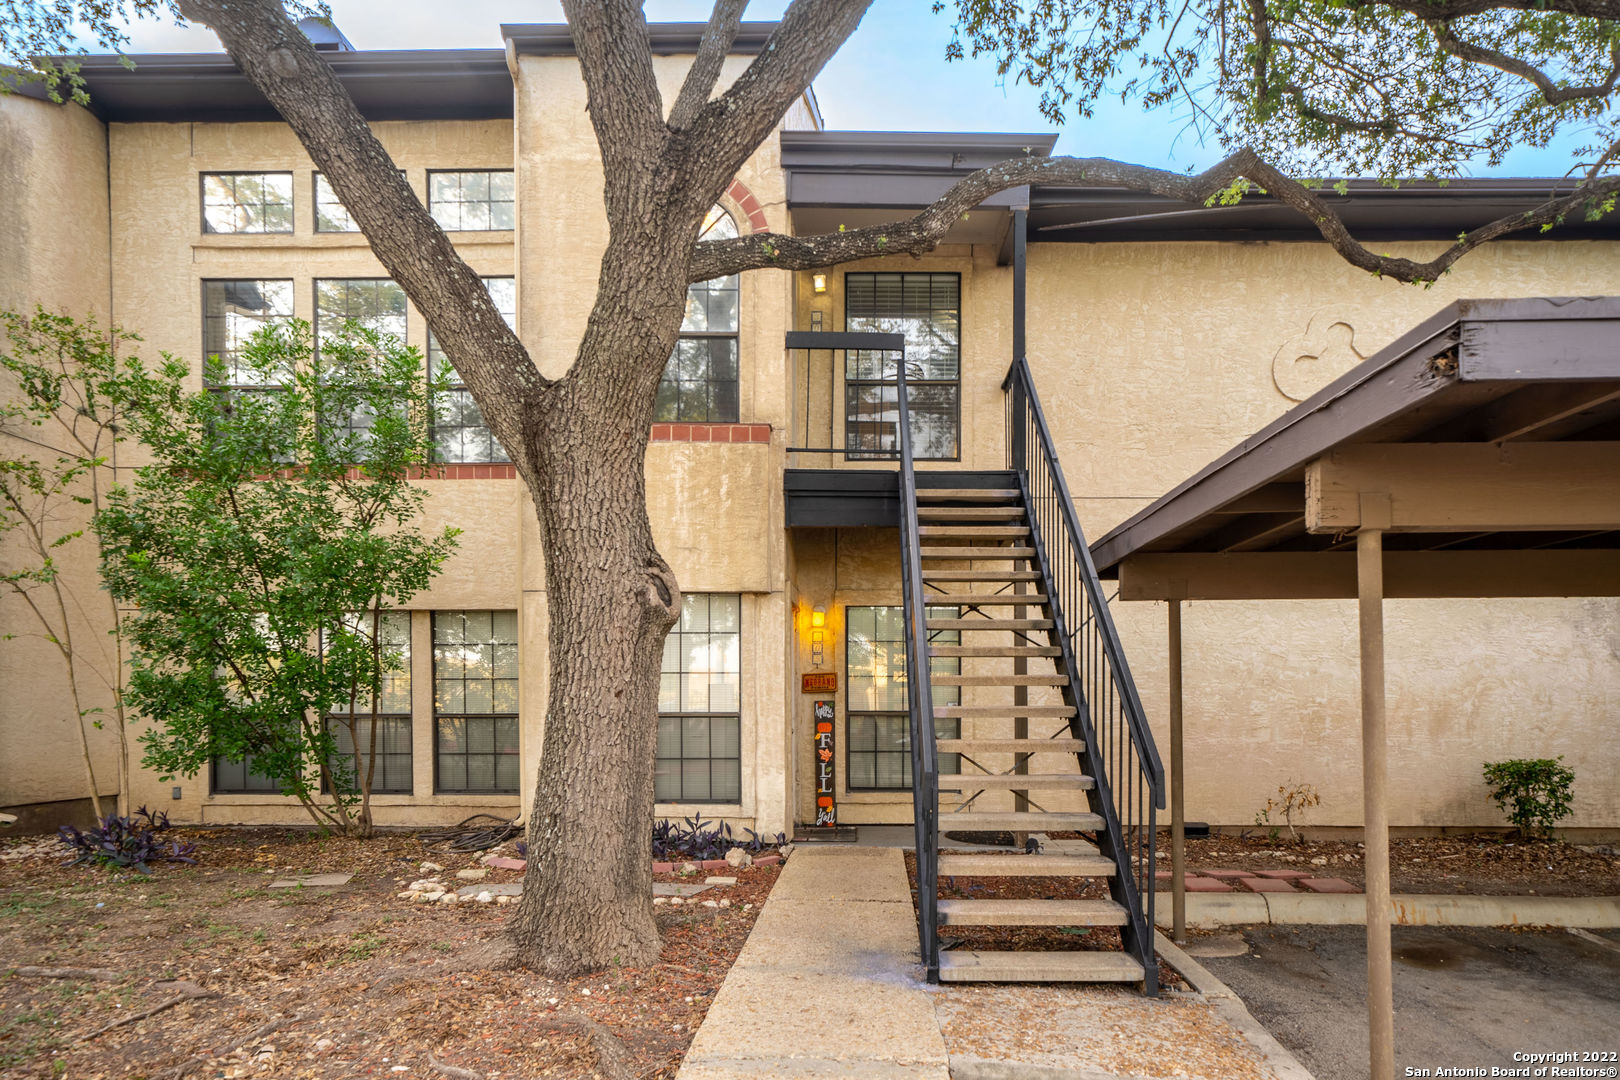 Beautifully remodeled condo located in the gated community of The Village at Woodlake, just minutes away from Randolph Air Force Base, Loop 1604, and I-35! This condo features a spacious, open floor plan, a wood burning fireplace, and high ceilings make it open and bright. The large master bedroom features a private balcony, skylights, and dual closets. Separate dining area with access to additional balcony with a beautiful pool view. Fees include water, exterior maintenance, insurance, and pest control.